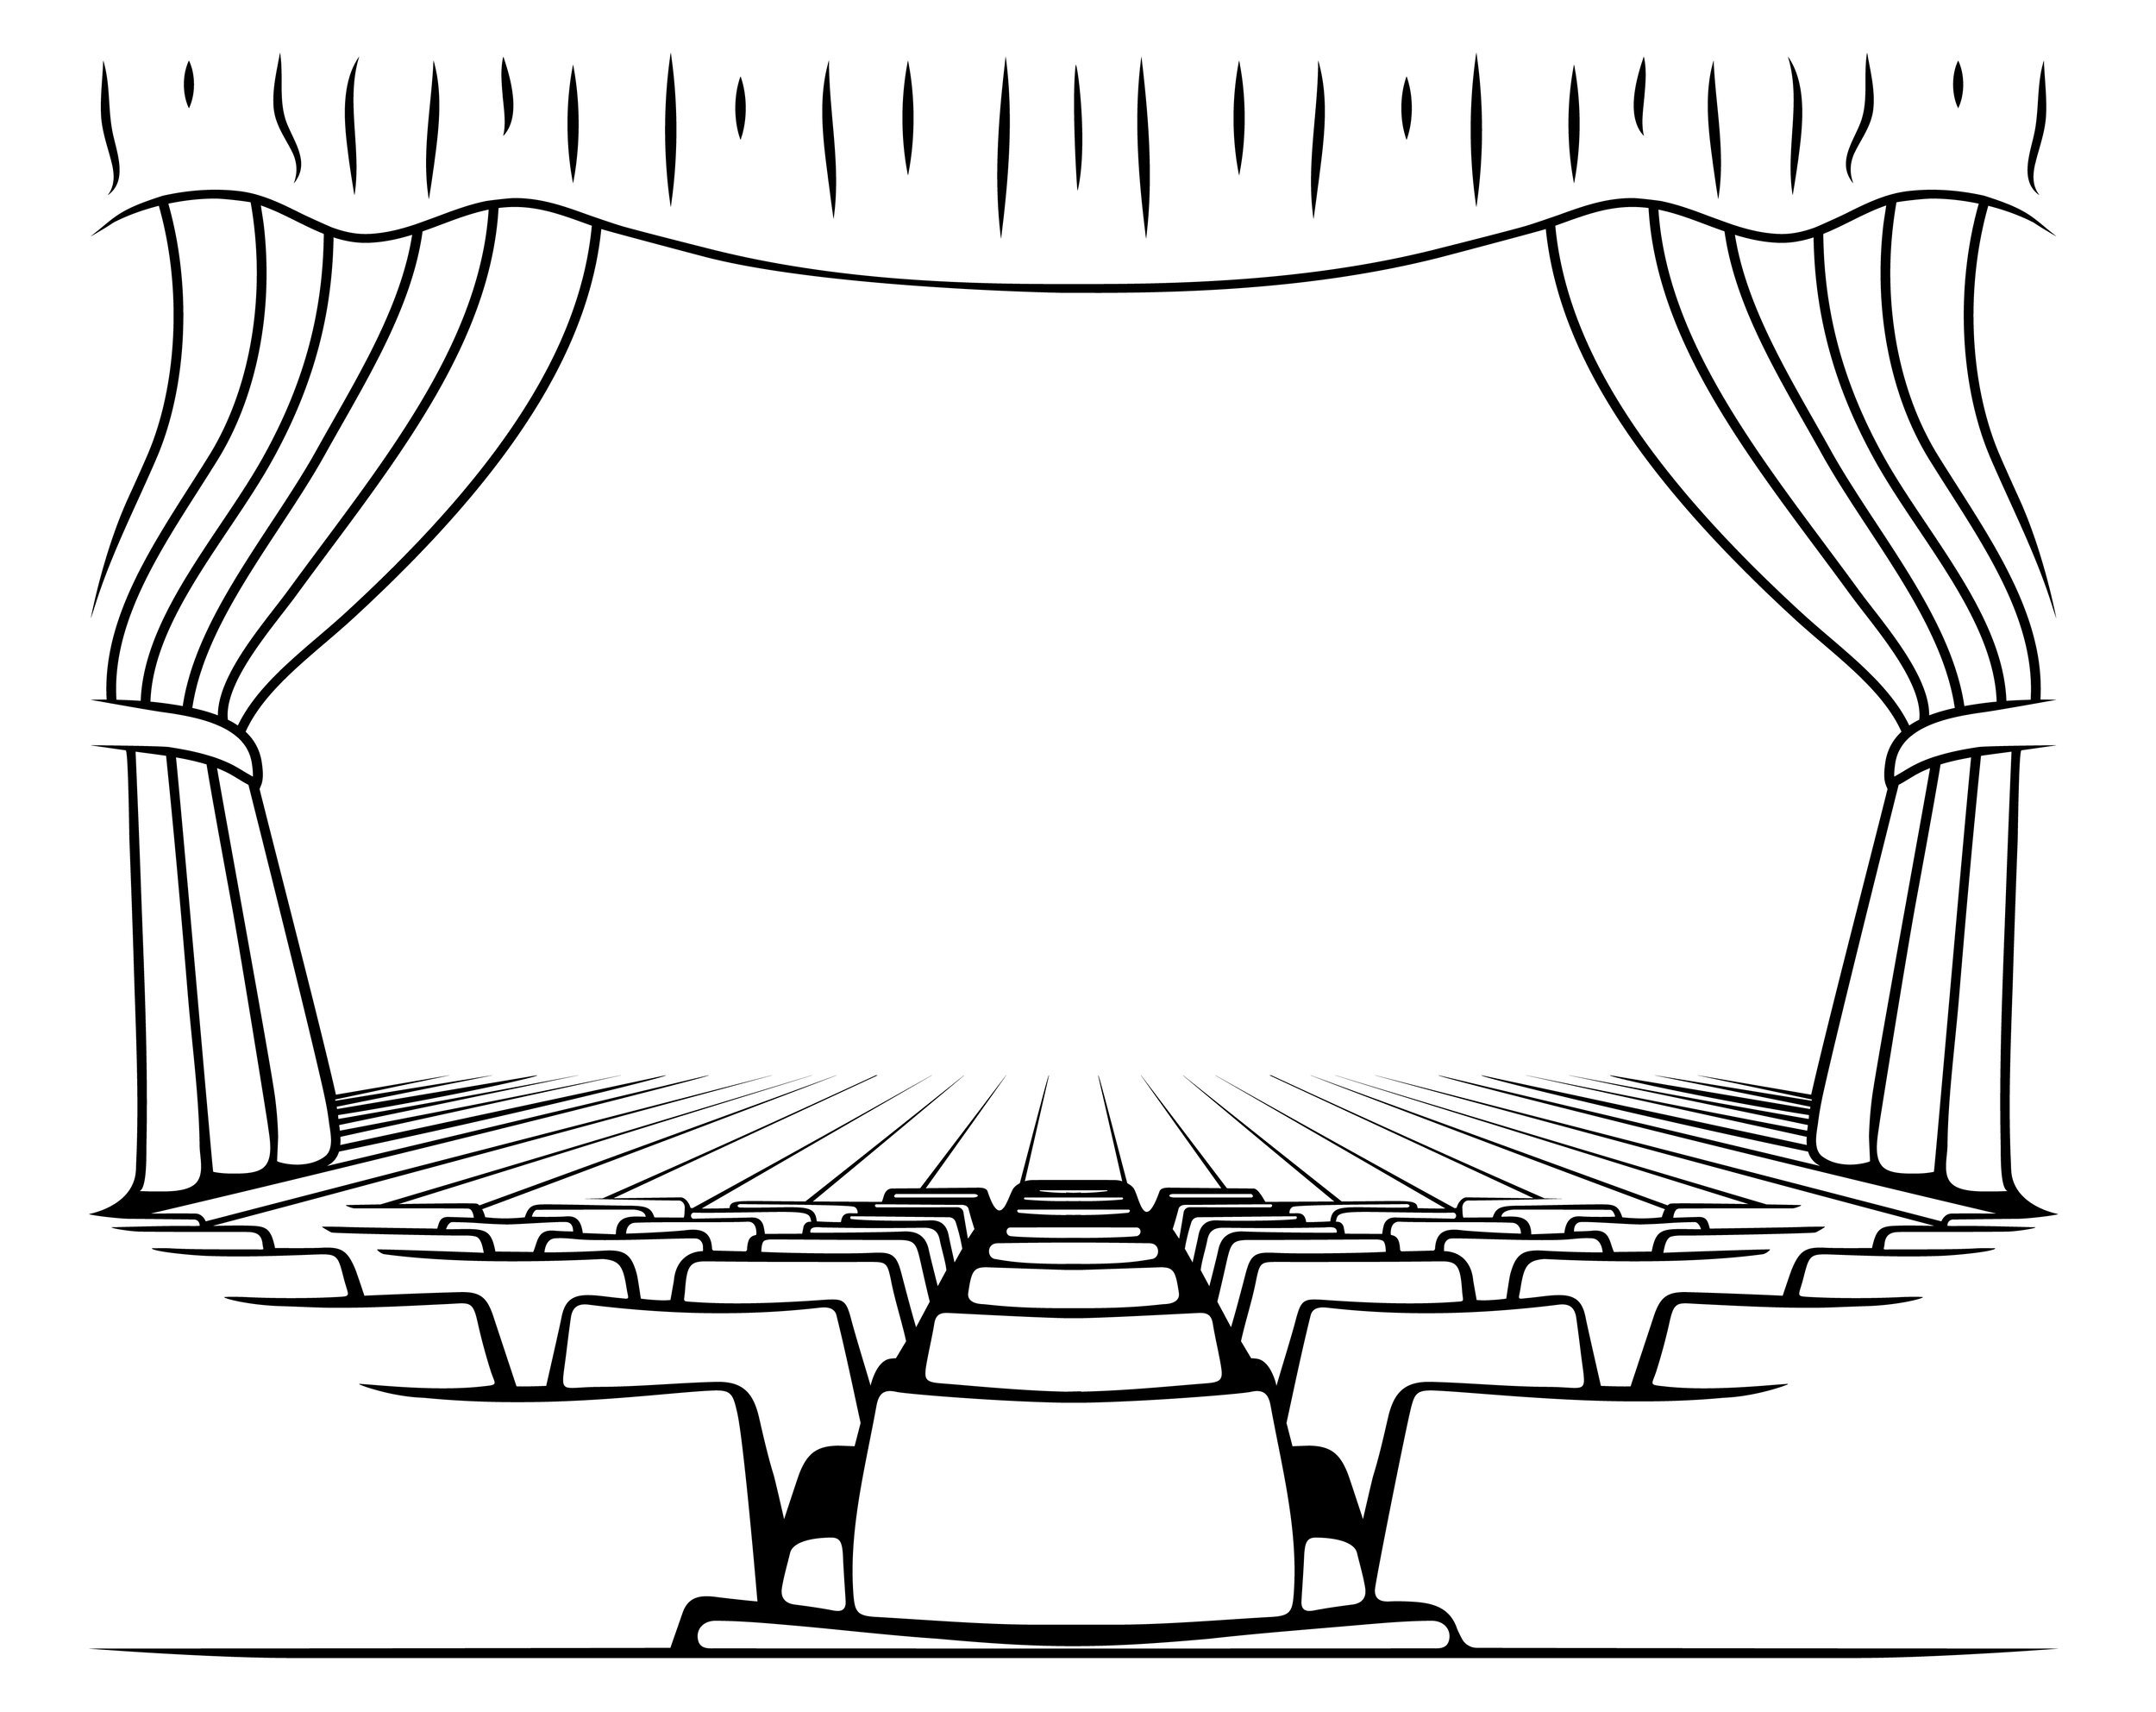 Coloring page shiny theater scene